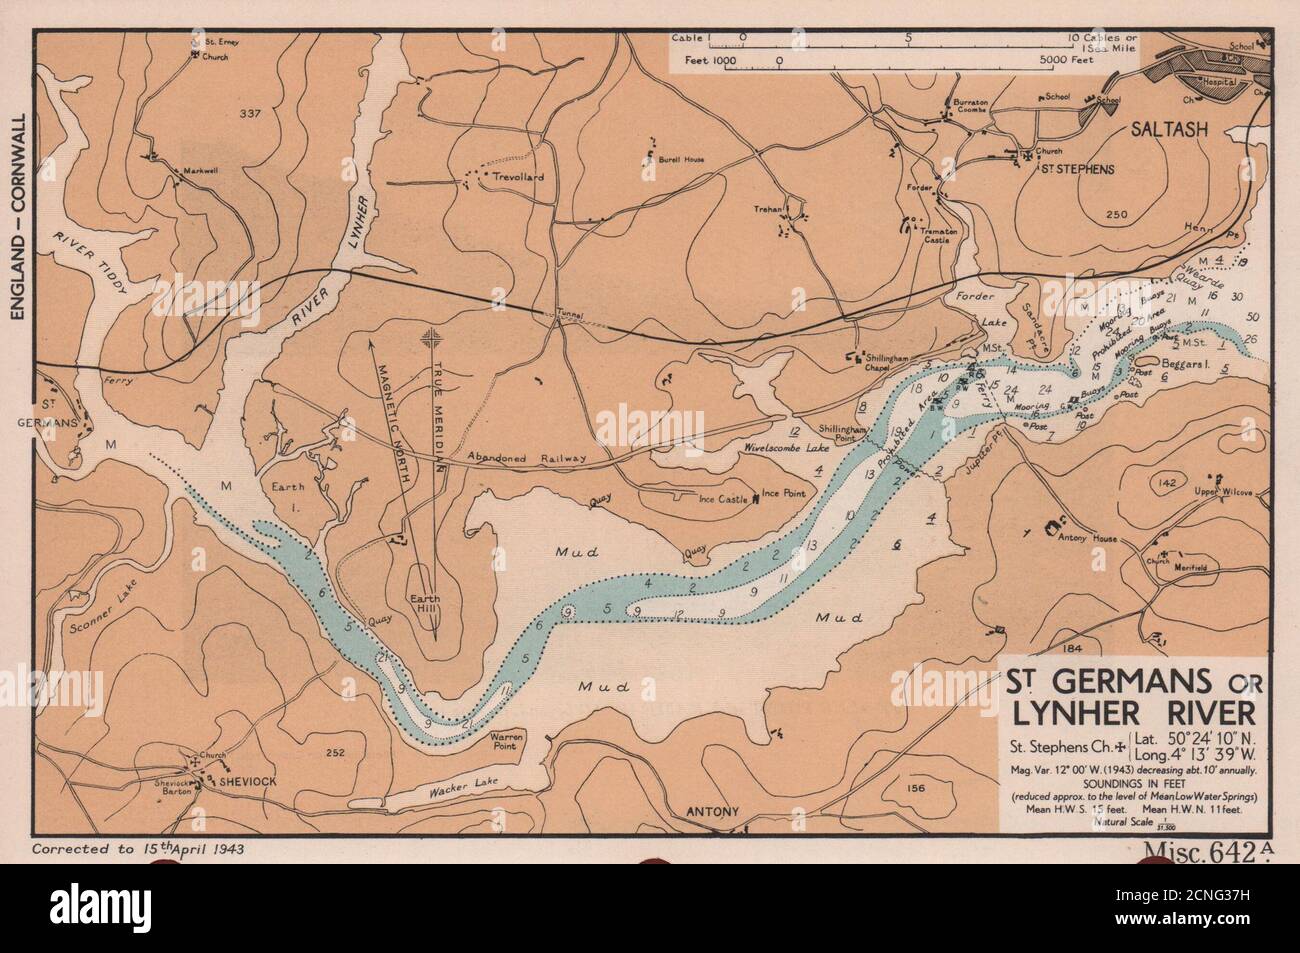 St. Germans or Lynher River. Saltash Cornwall sea coast chart ADMIRALTY 1943 map Stock Photo